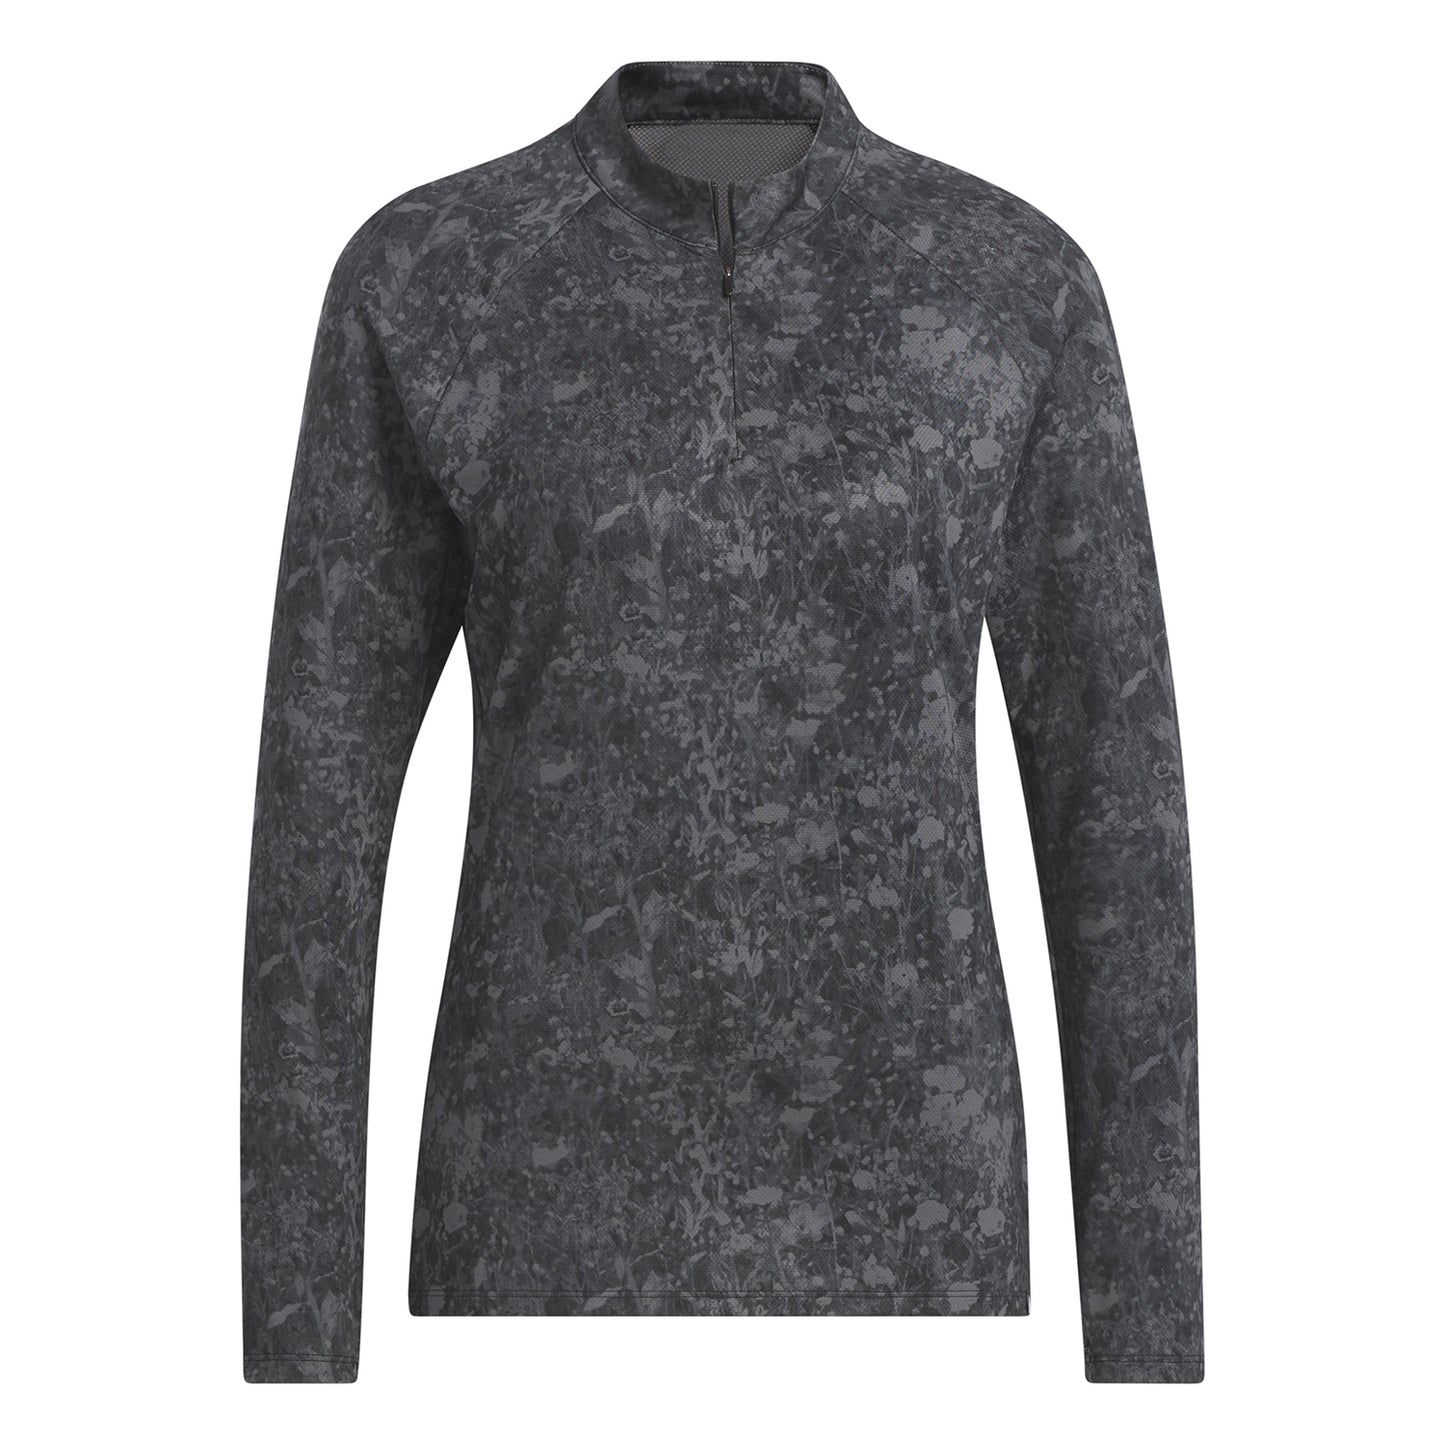 adidas Ladies Long Sleeve Zip-Neck Top with Abstract Print in Black